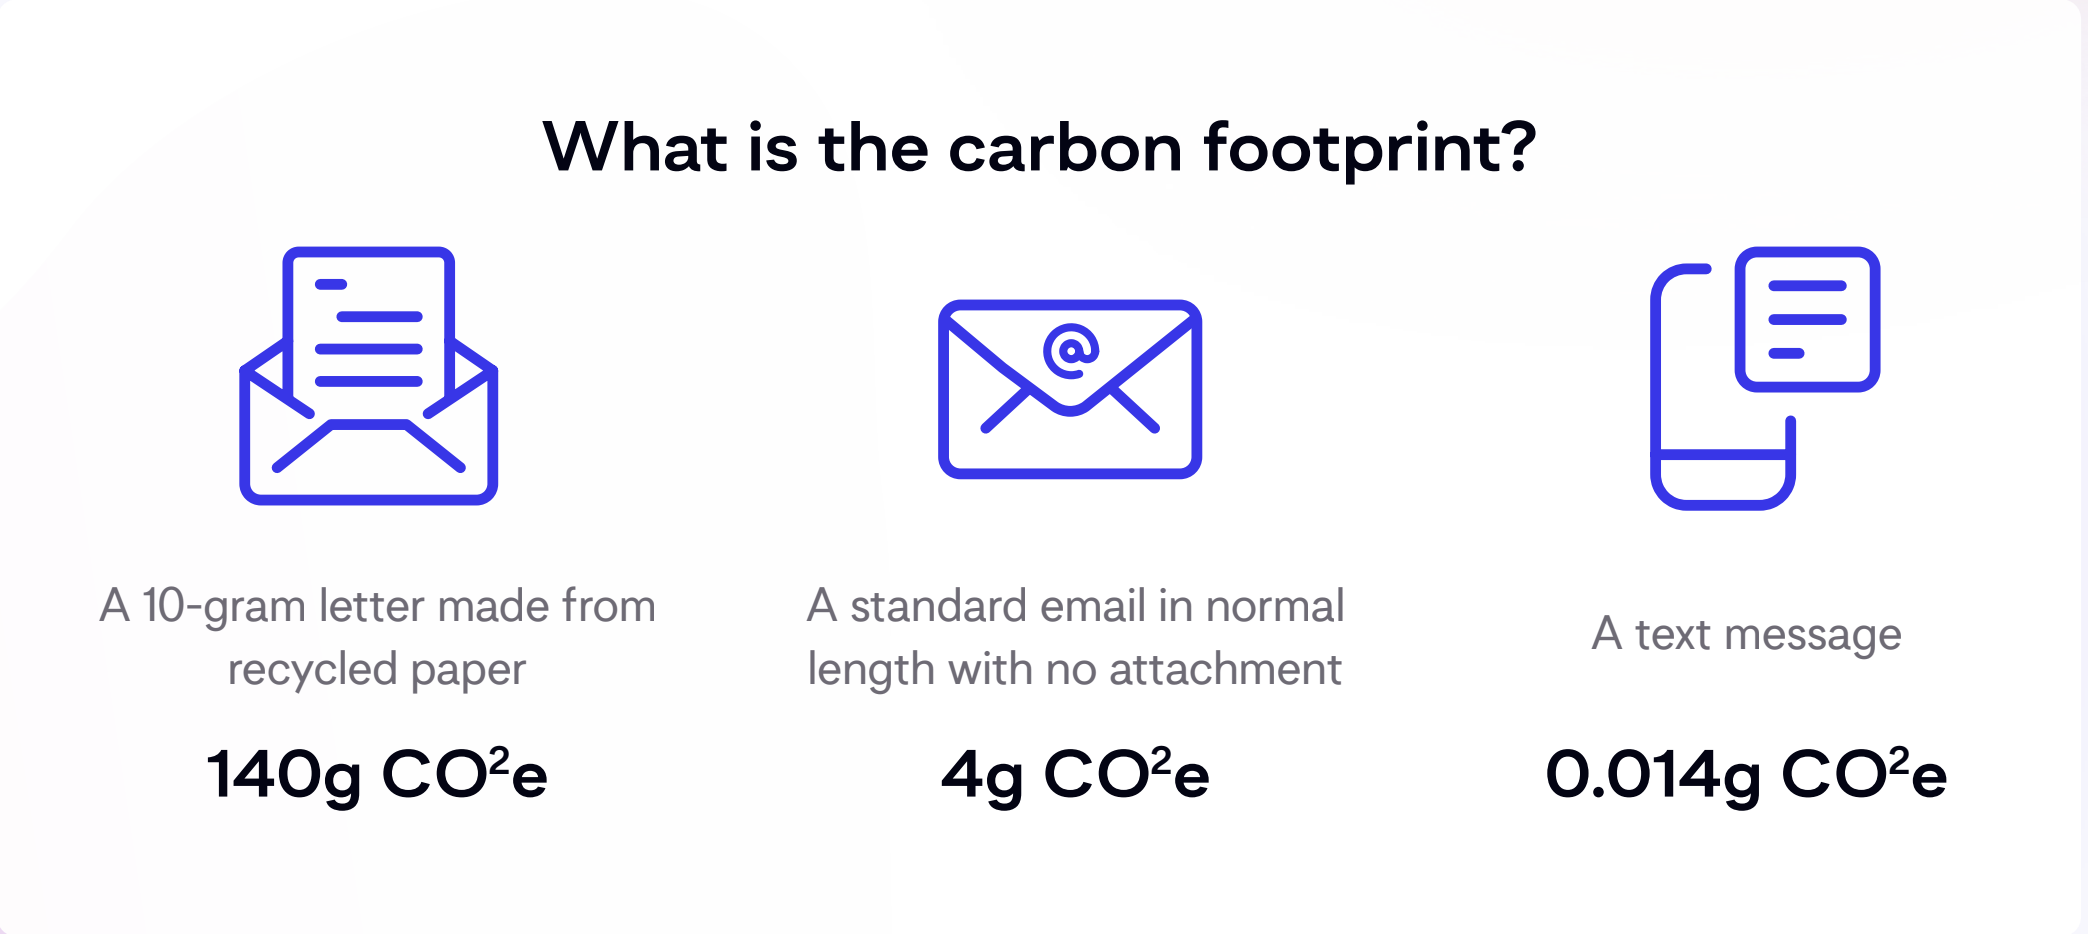 What is the carbon footprint? A 10-gram letter made from recycled paper = 140g CO2e. A standard email in normal length with no attachment = 4g CO2e. And a text message = 0.014g CO2e